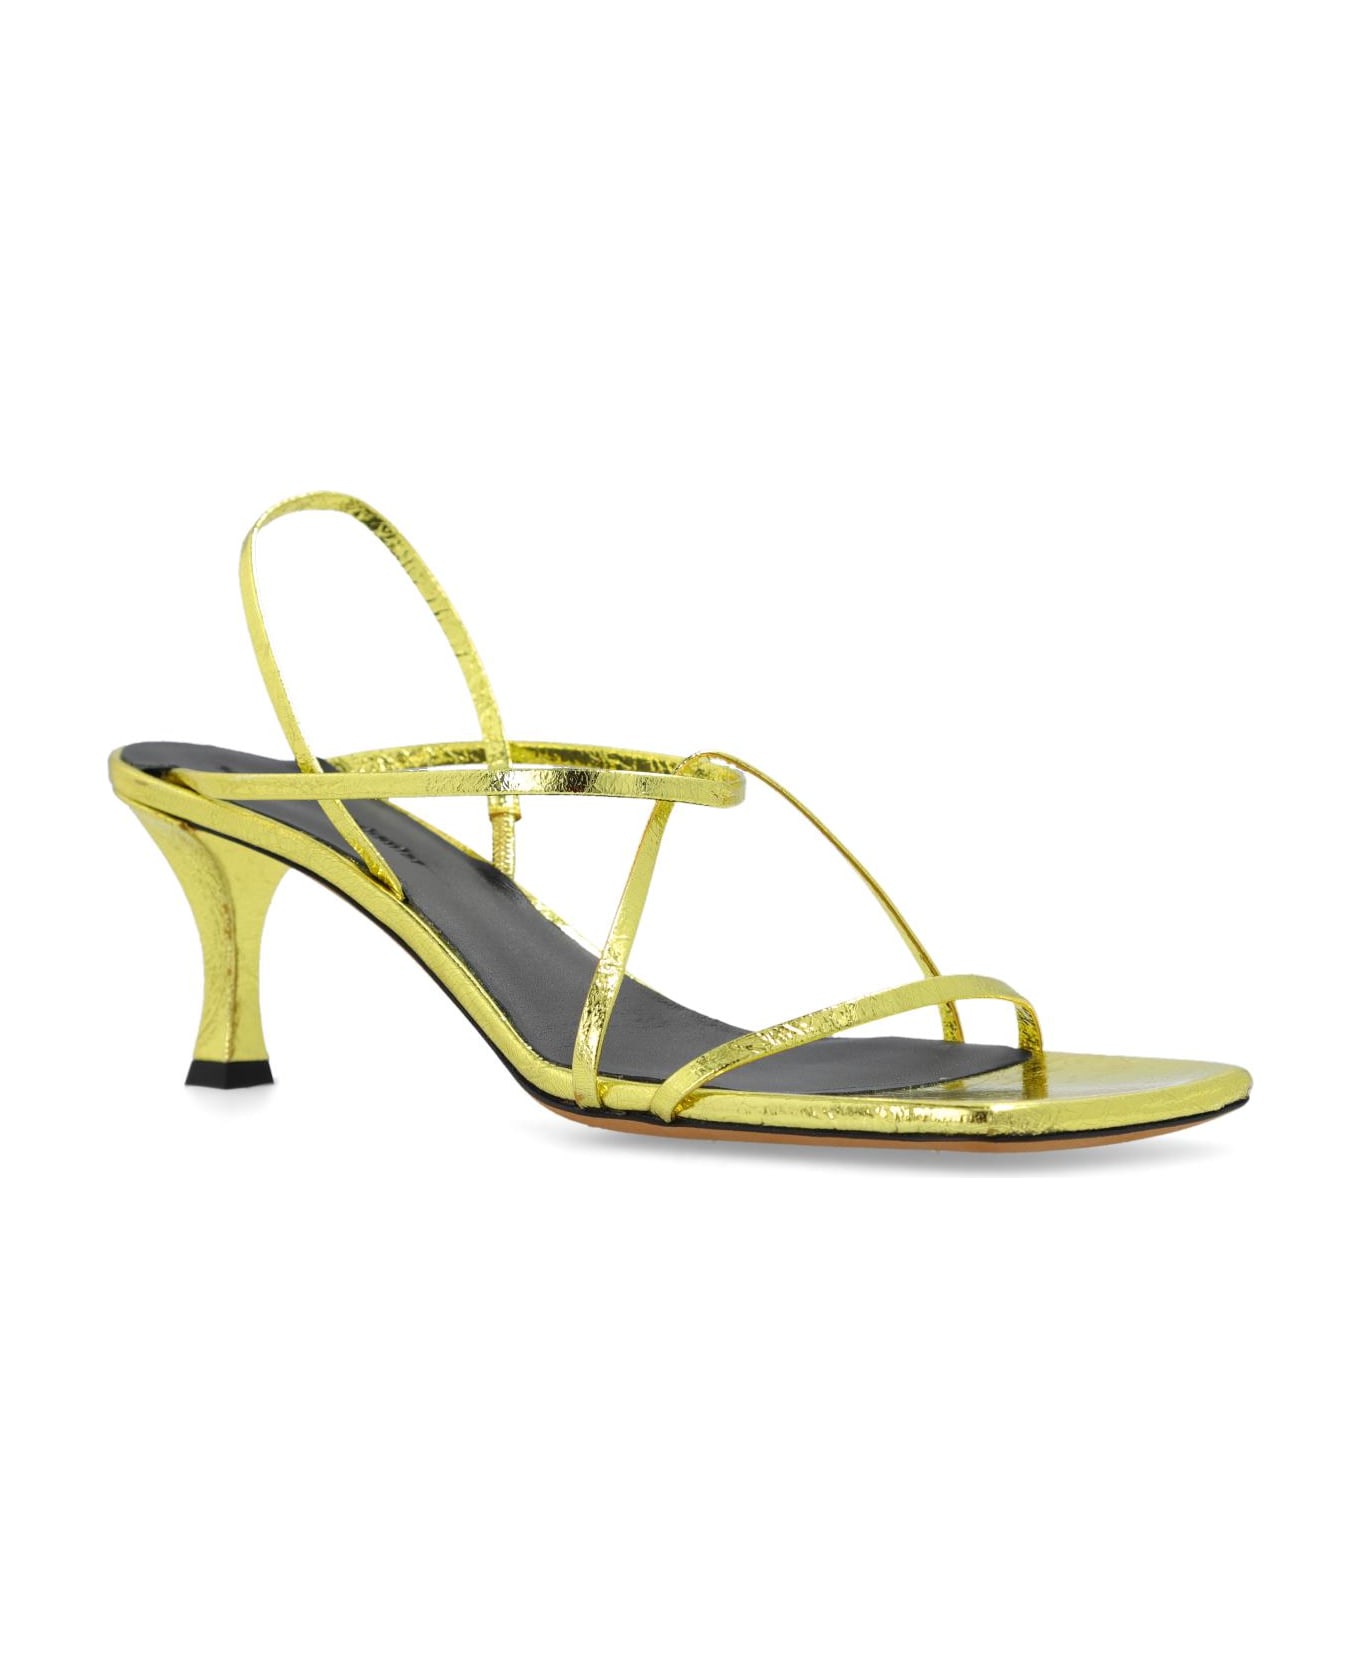 Proenza Schouler 'square Strappy' Heeled Sandals - Gold